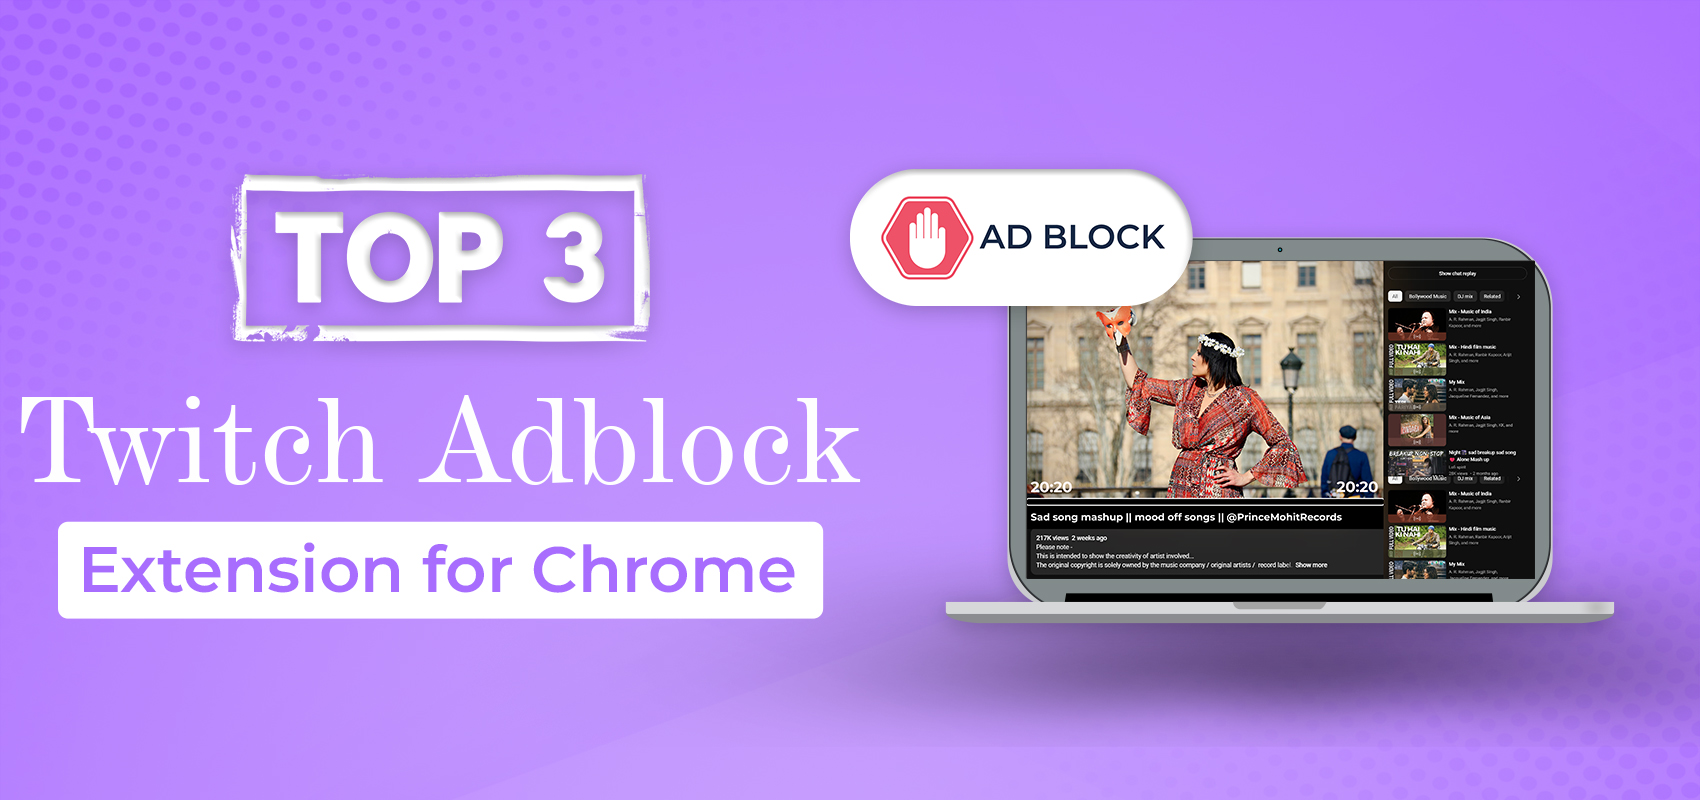 top3-twitch-adblock-extension-for-chrome